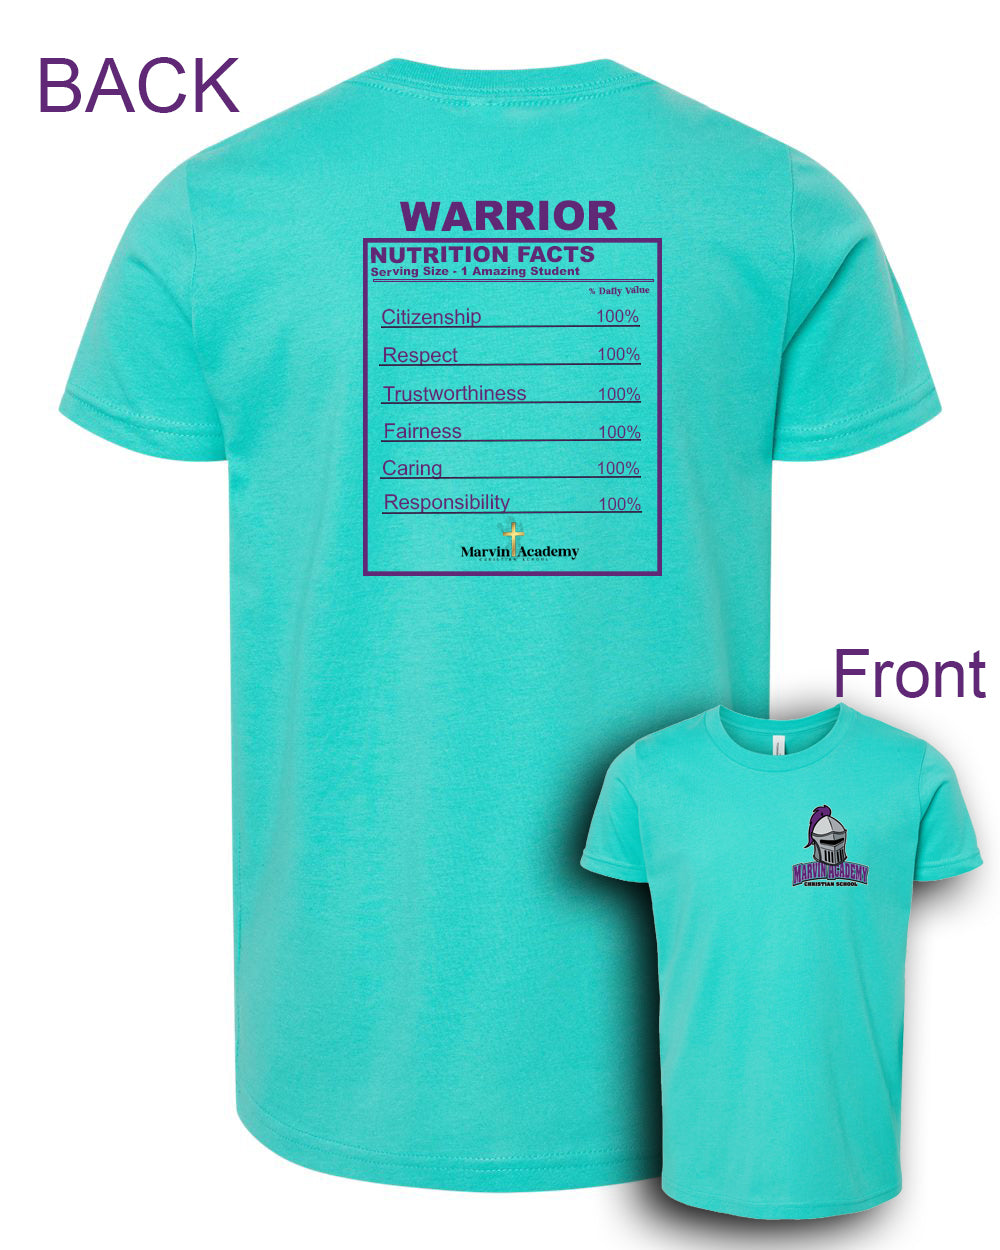 **NEW Warrior Nutrition Facts T-Shirt